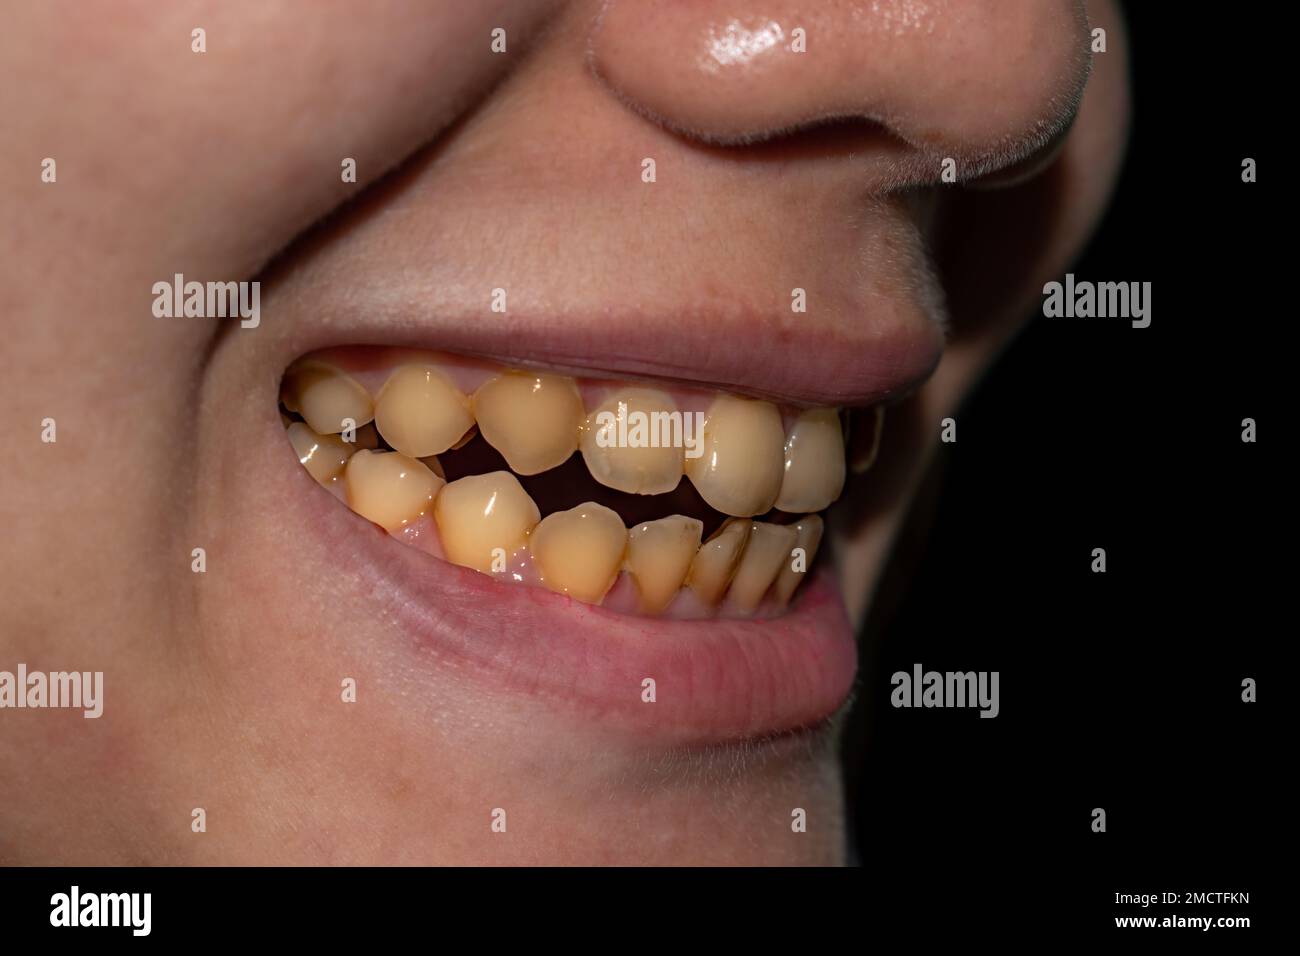 Small teeth with yellow colored tobacco stains. Poor oral hygiene. Stock Photo